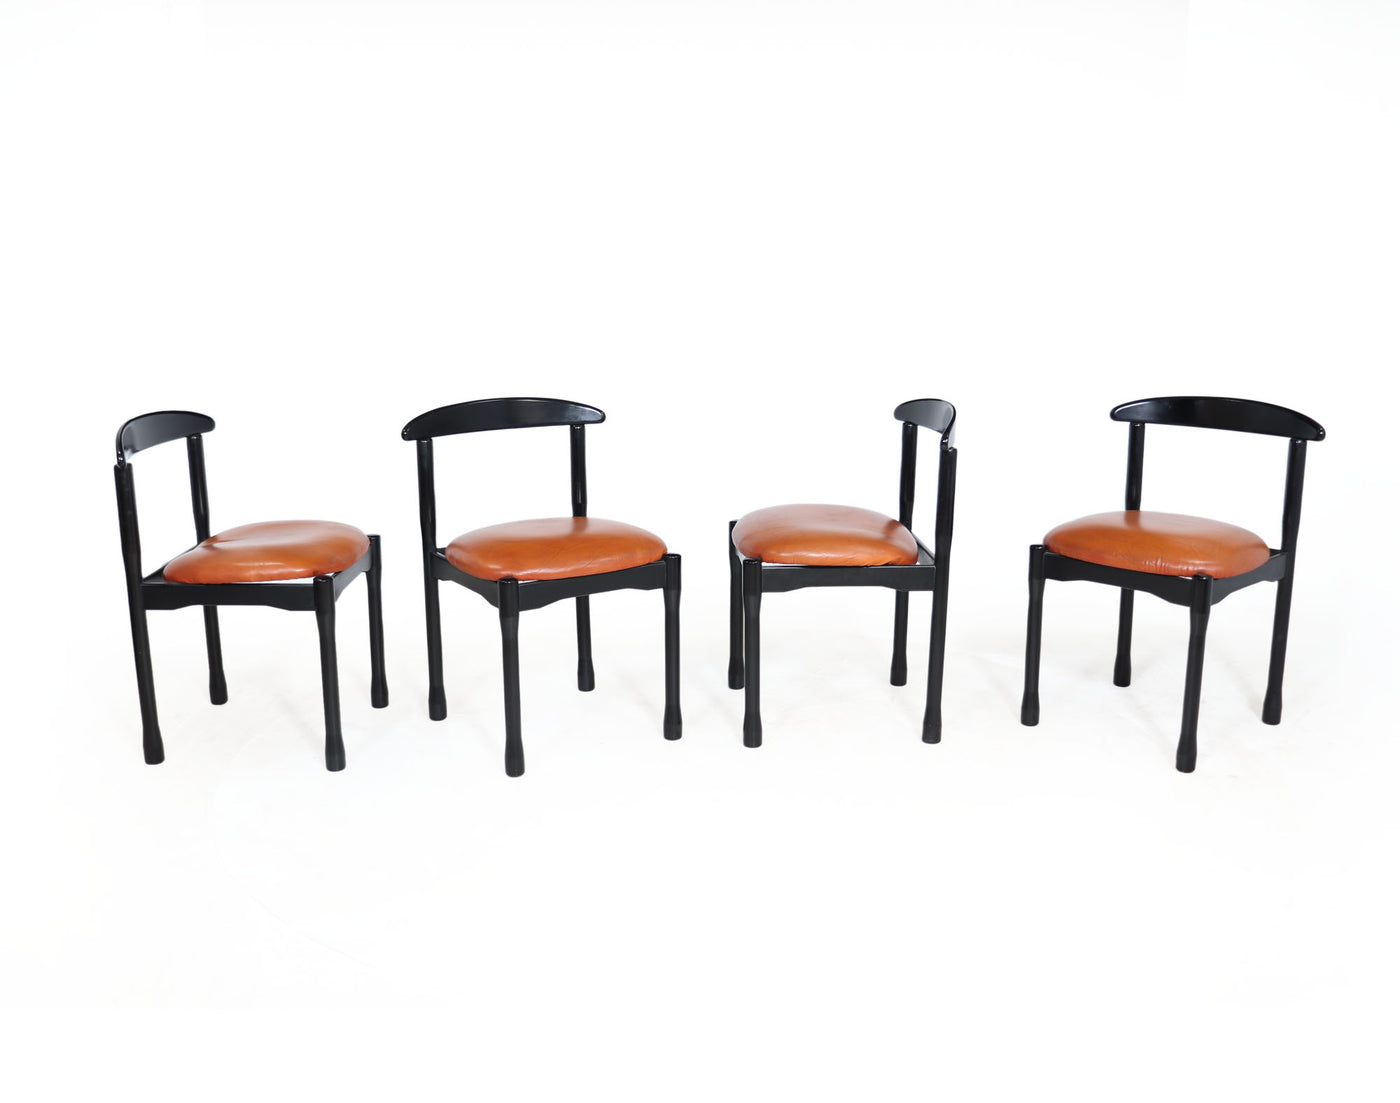 MId Century Italian Dining Chairs by Vico Magistretti